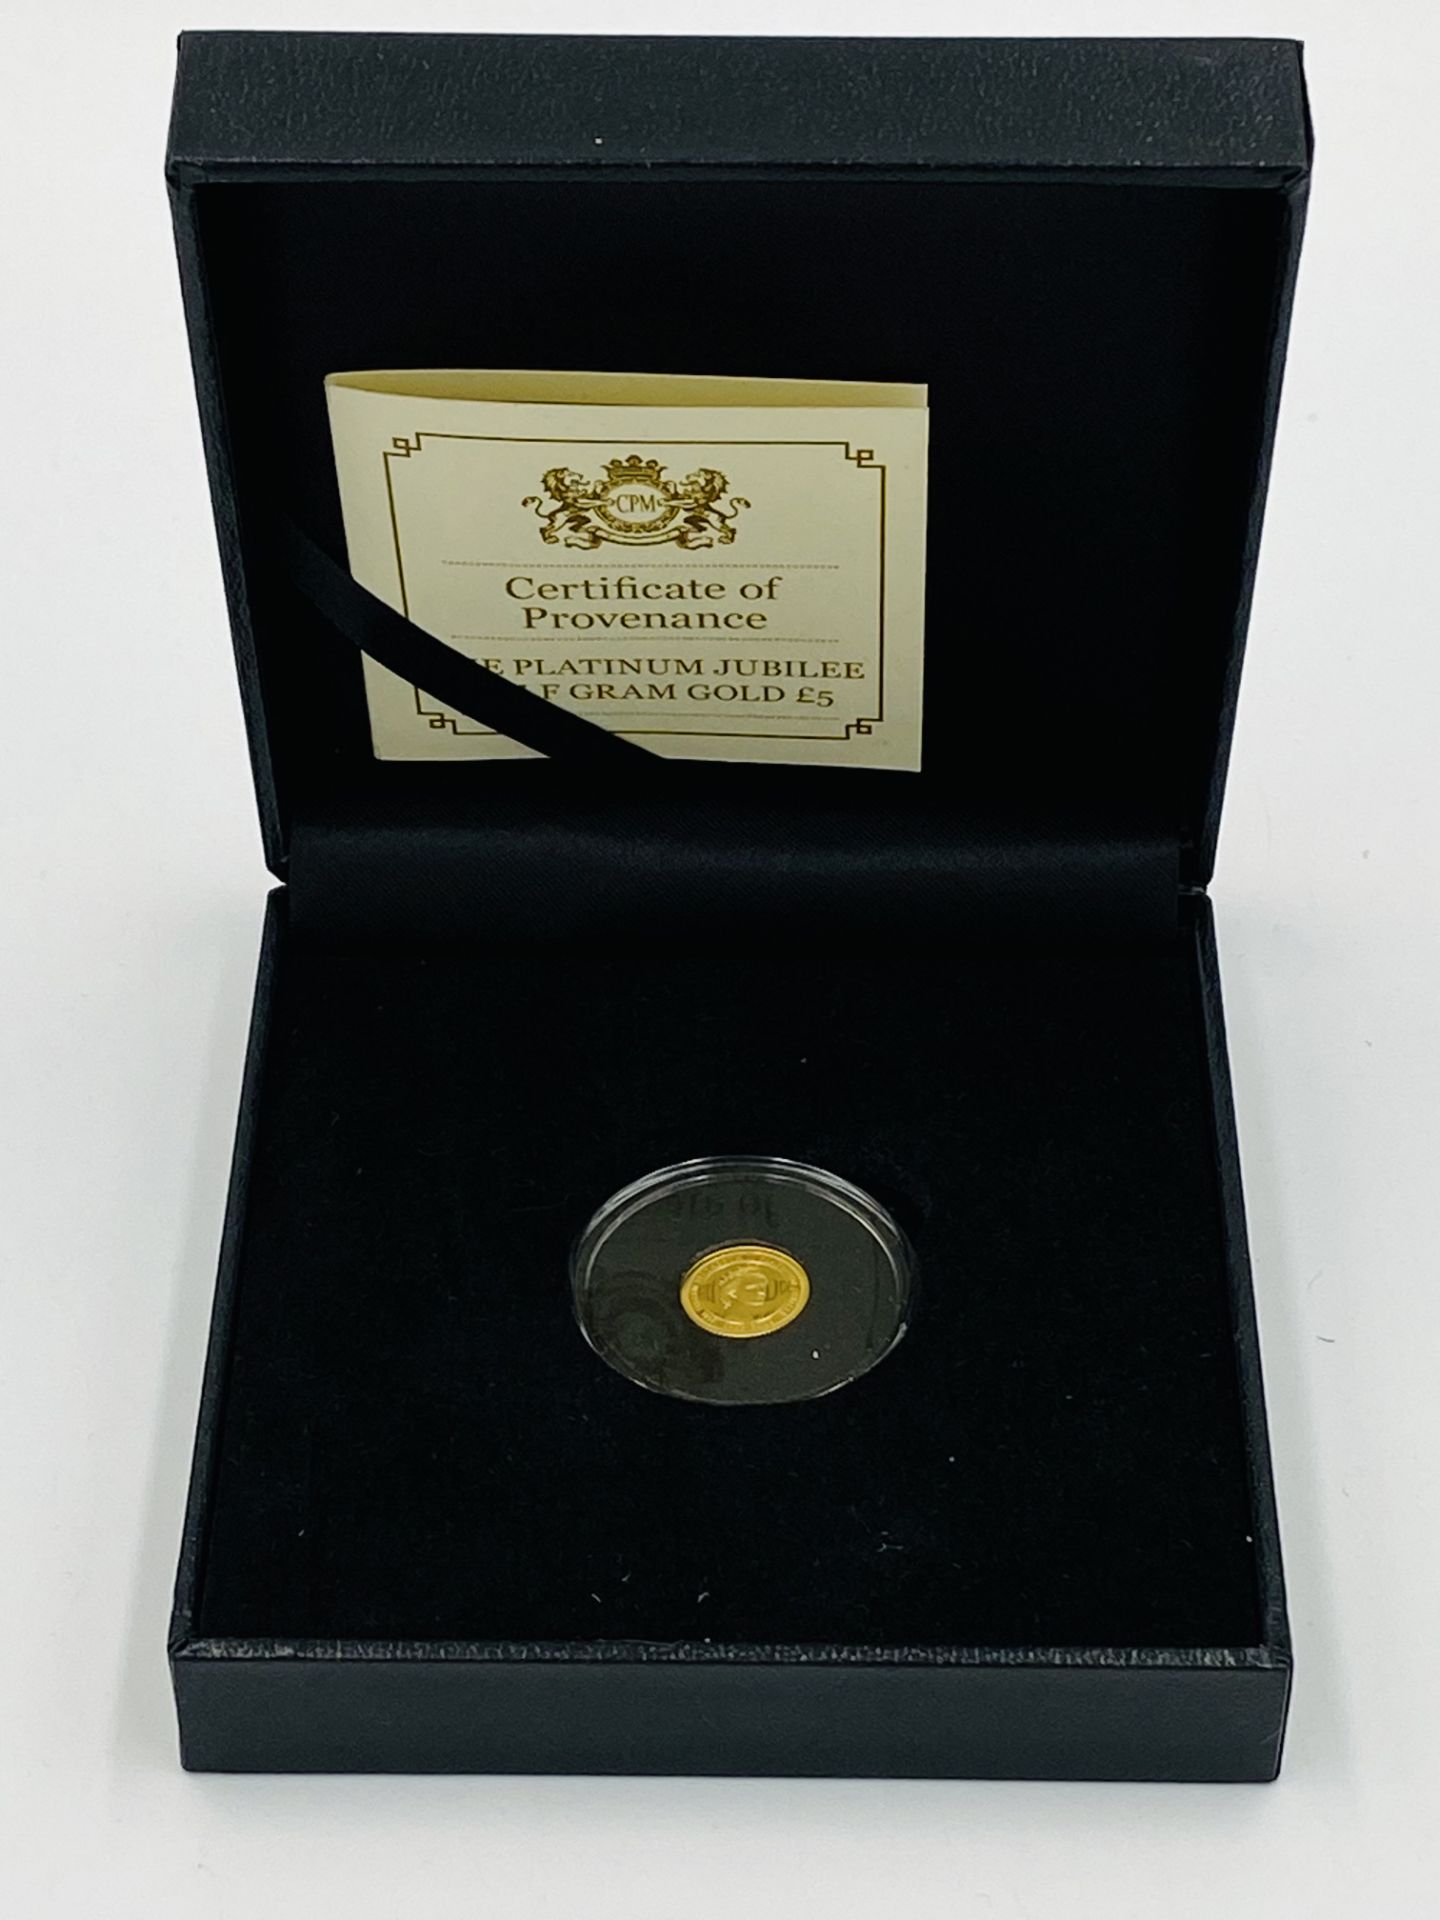 Platinum Jubilee half gram gold £5 coin, in box with Certificate of Authenticity. - Image 4 of 4